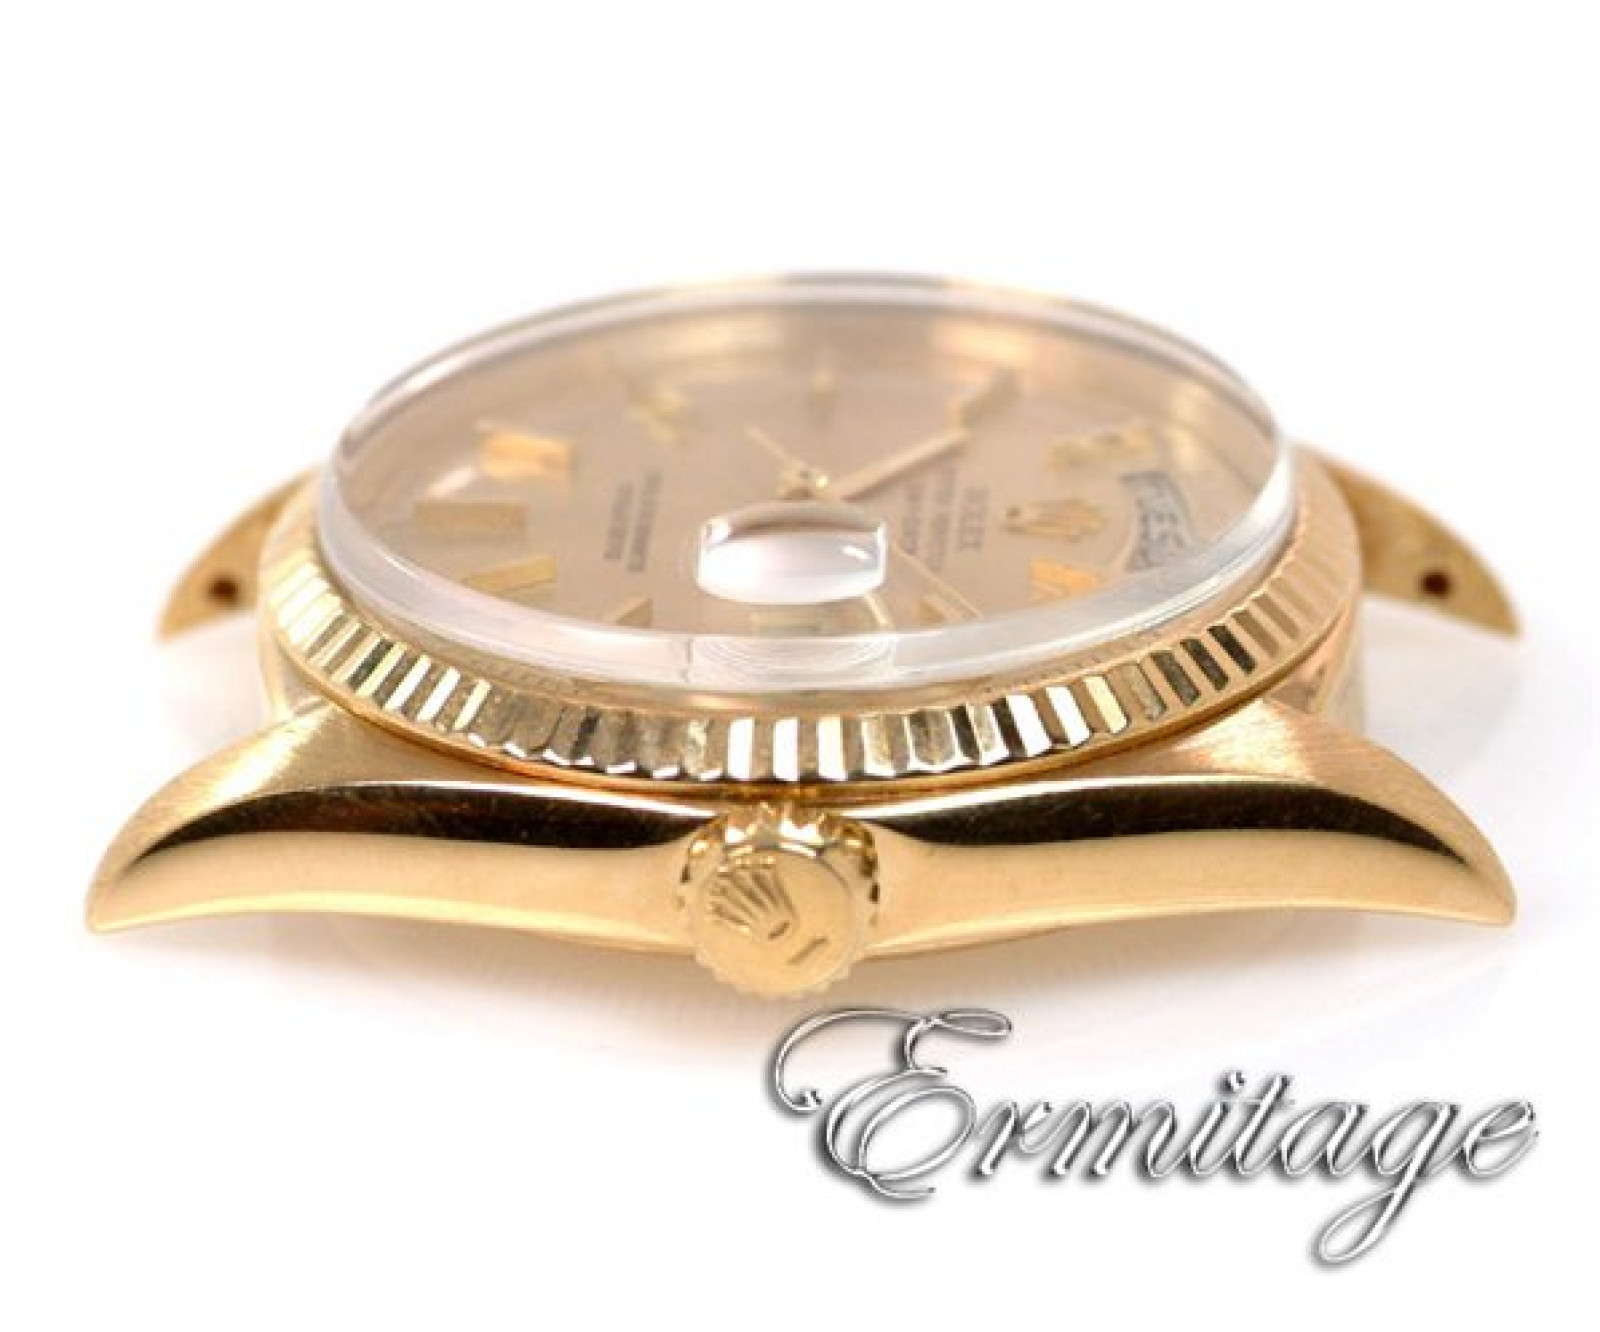 Vintage Rolex Day-Date 1803 Gold Year 1963 with Champagne Dial 1963